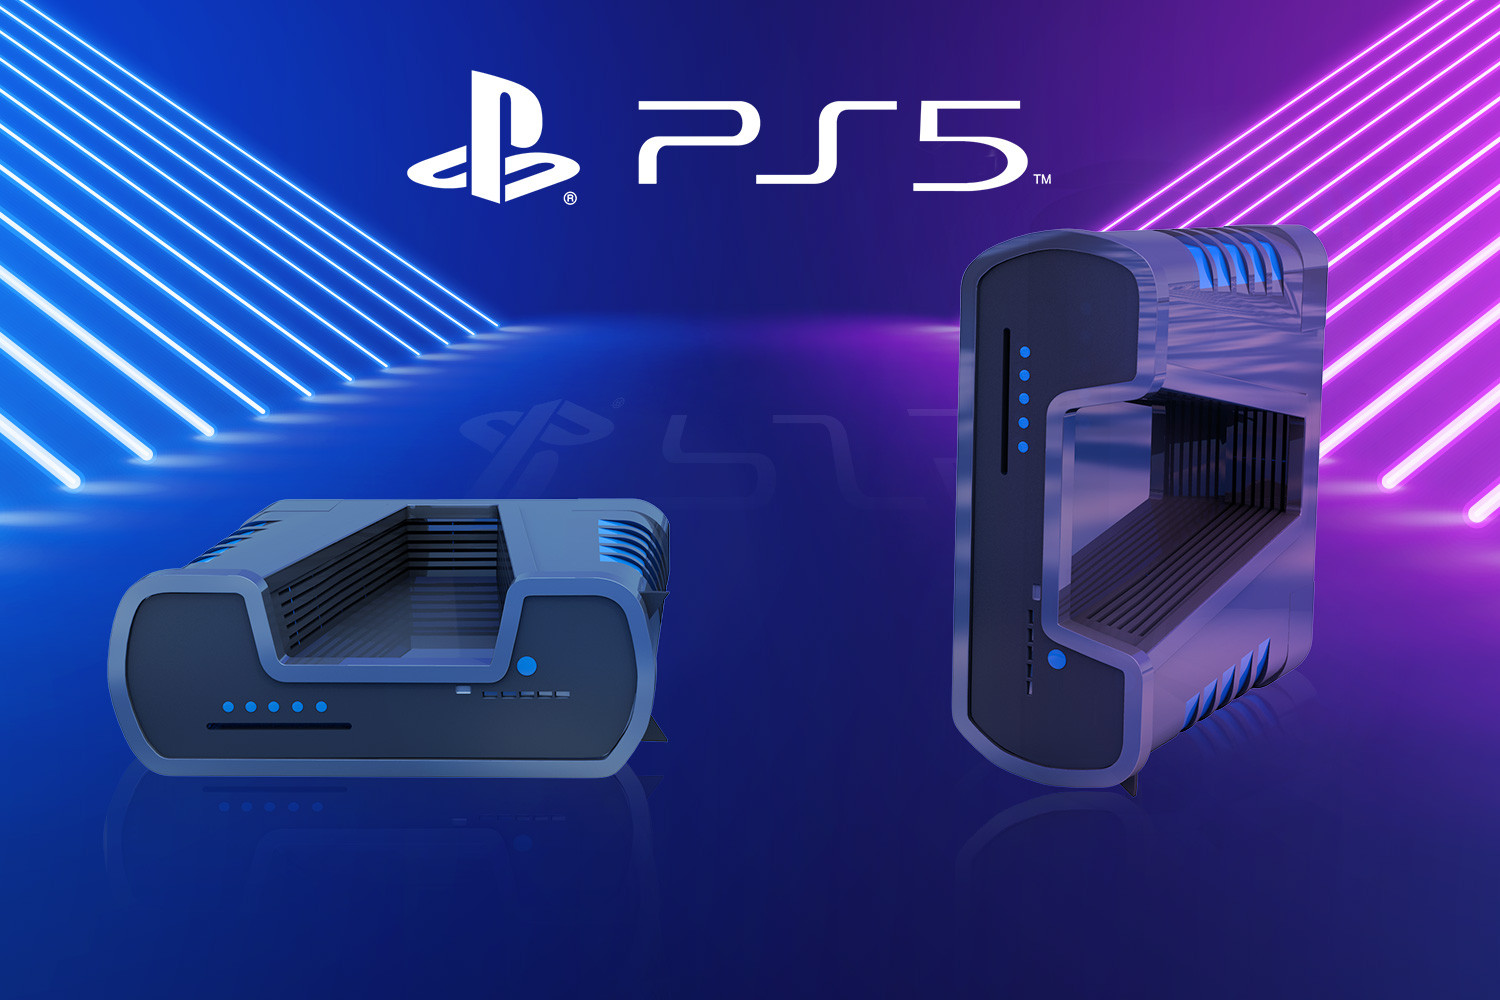 sony-playstation5-ps5-picture-news-affinity